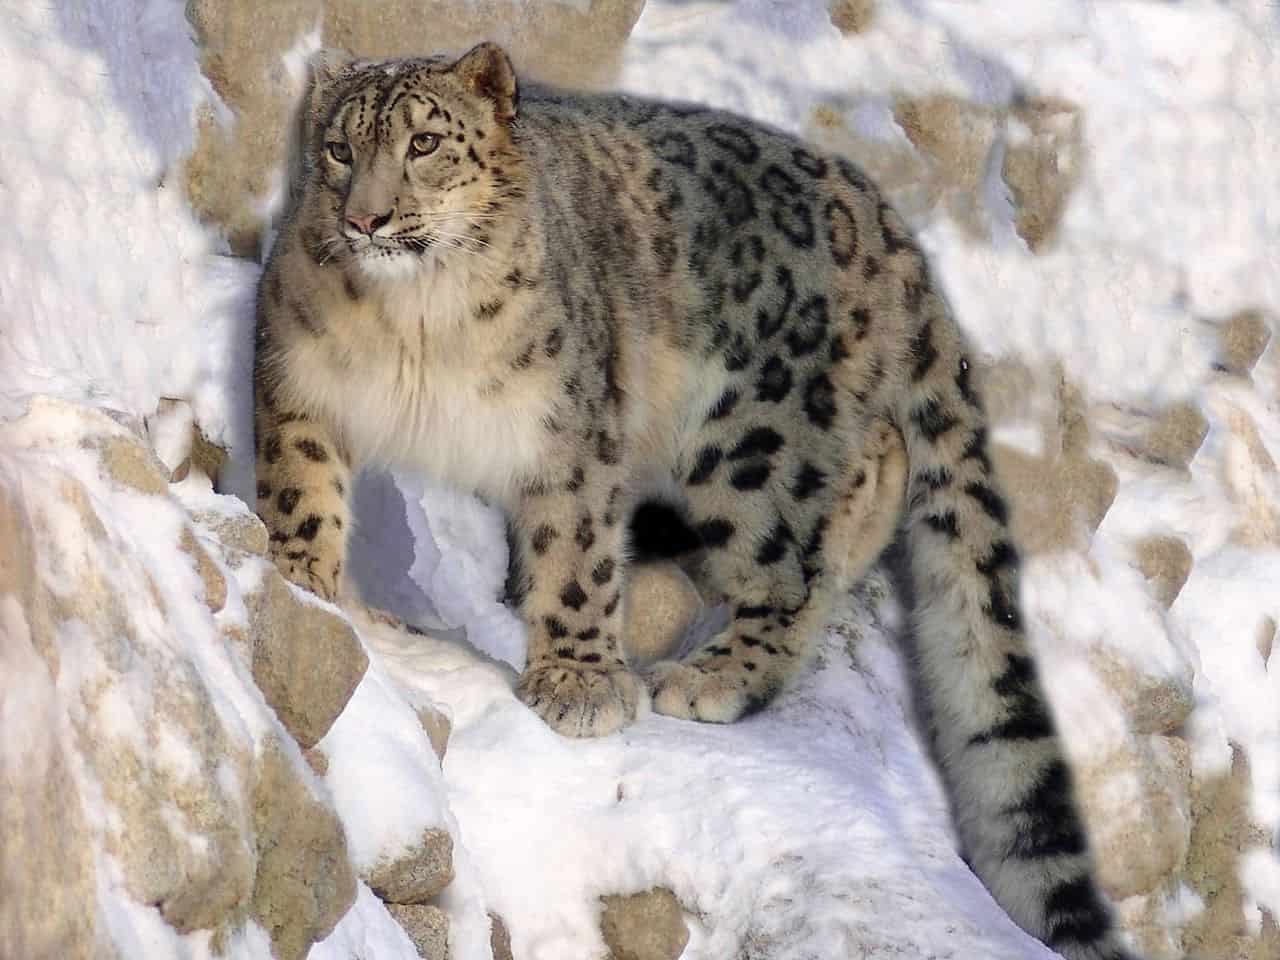 National Animal of Afghanistan - Snow leopard